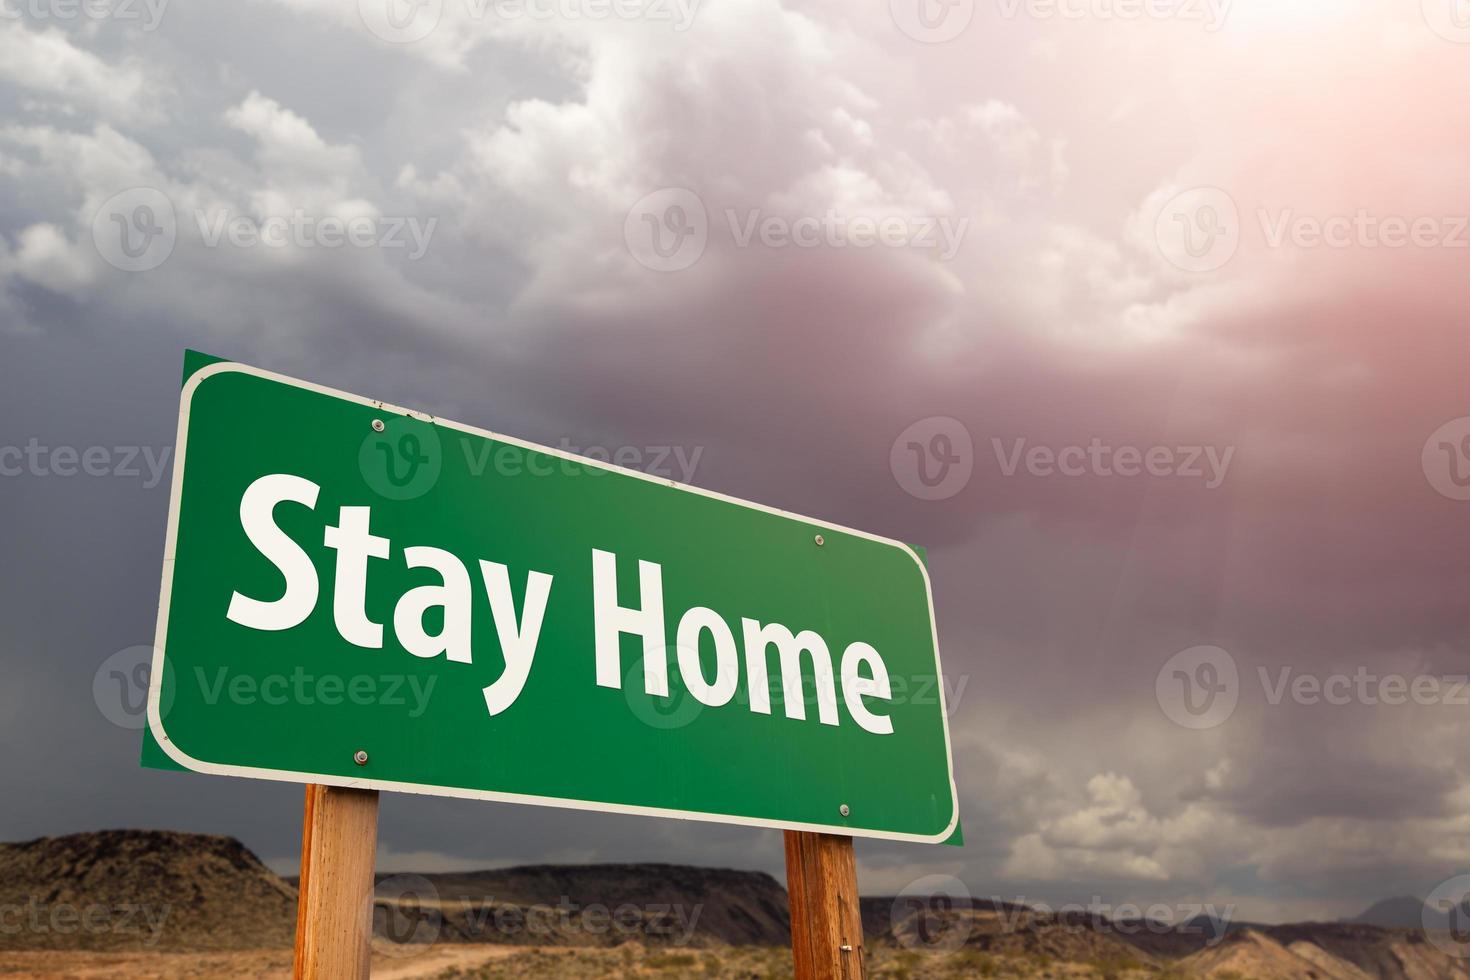 Stay Home Green Road Sign Against Ominous Stormy Cloudy Sky photo